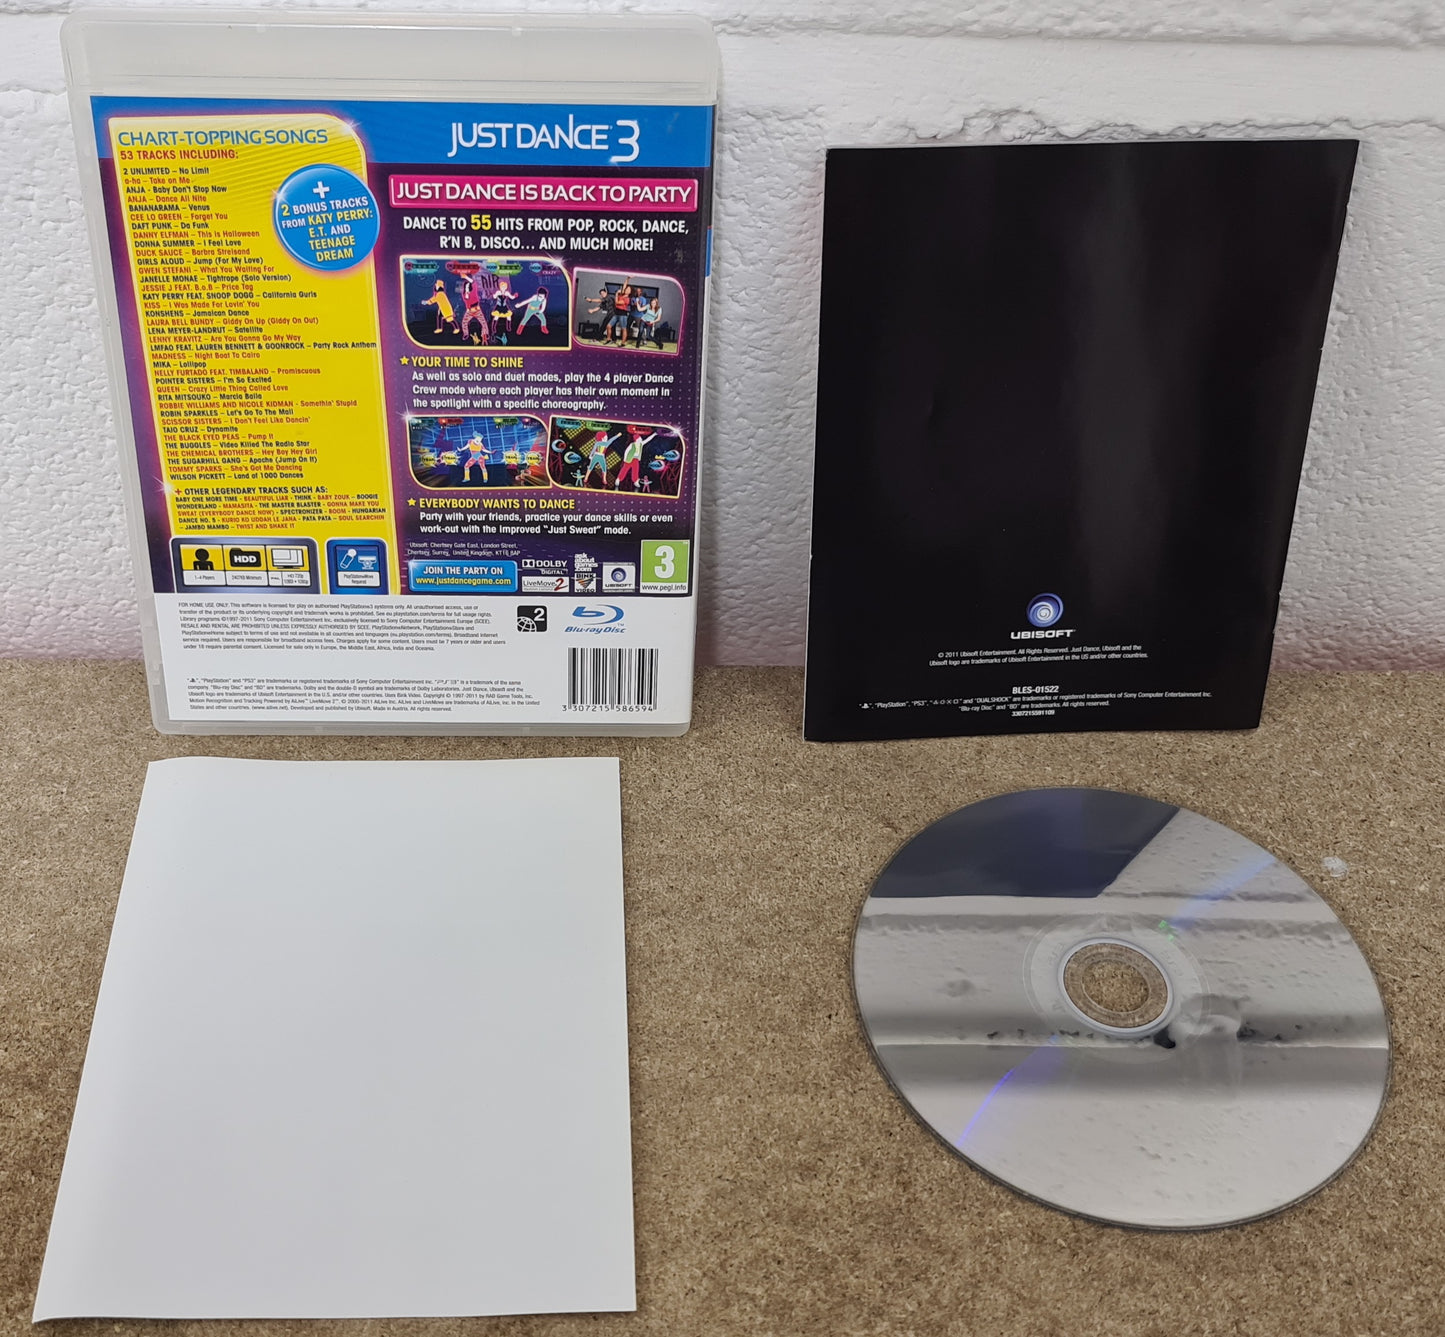 Just Dance 3 Special Edition Sony Playstation 3 (PS3) Game